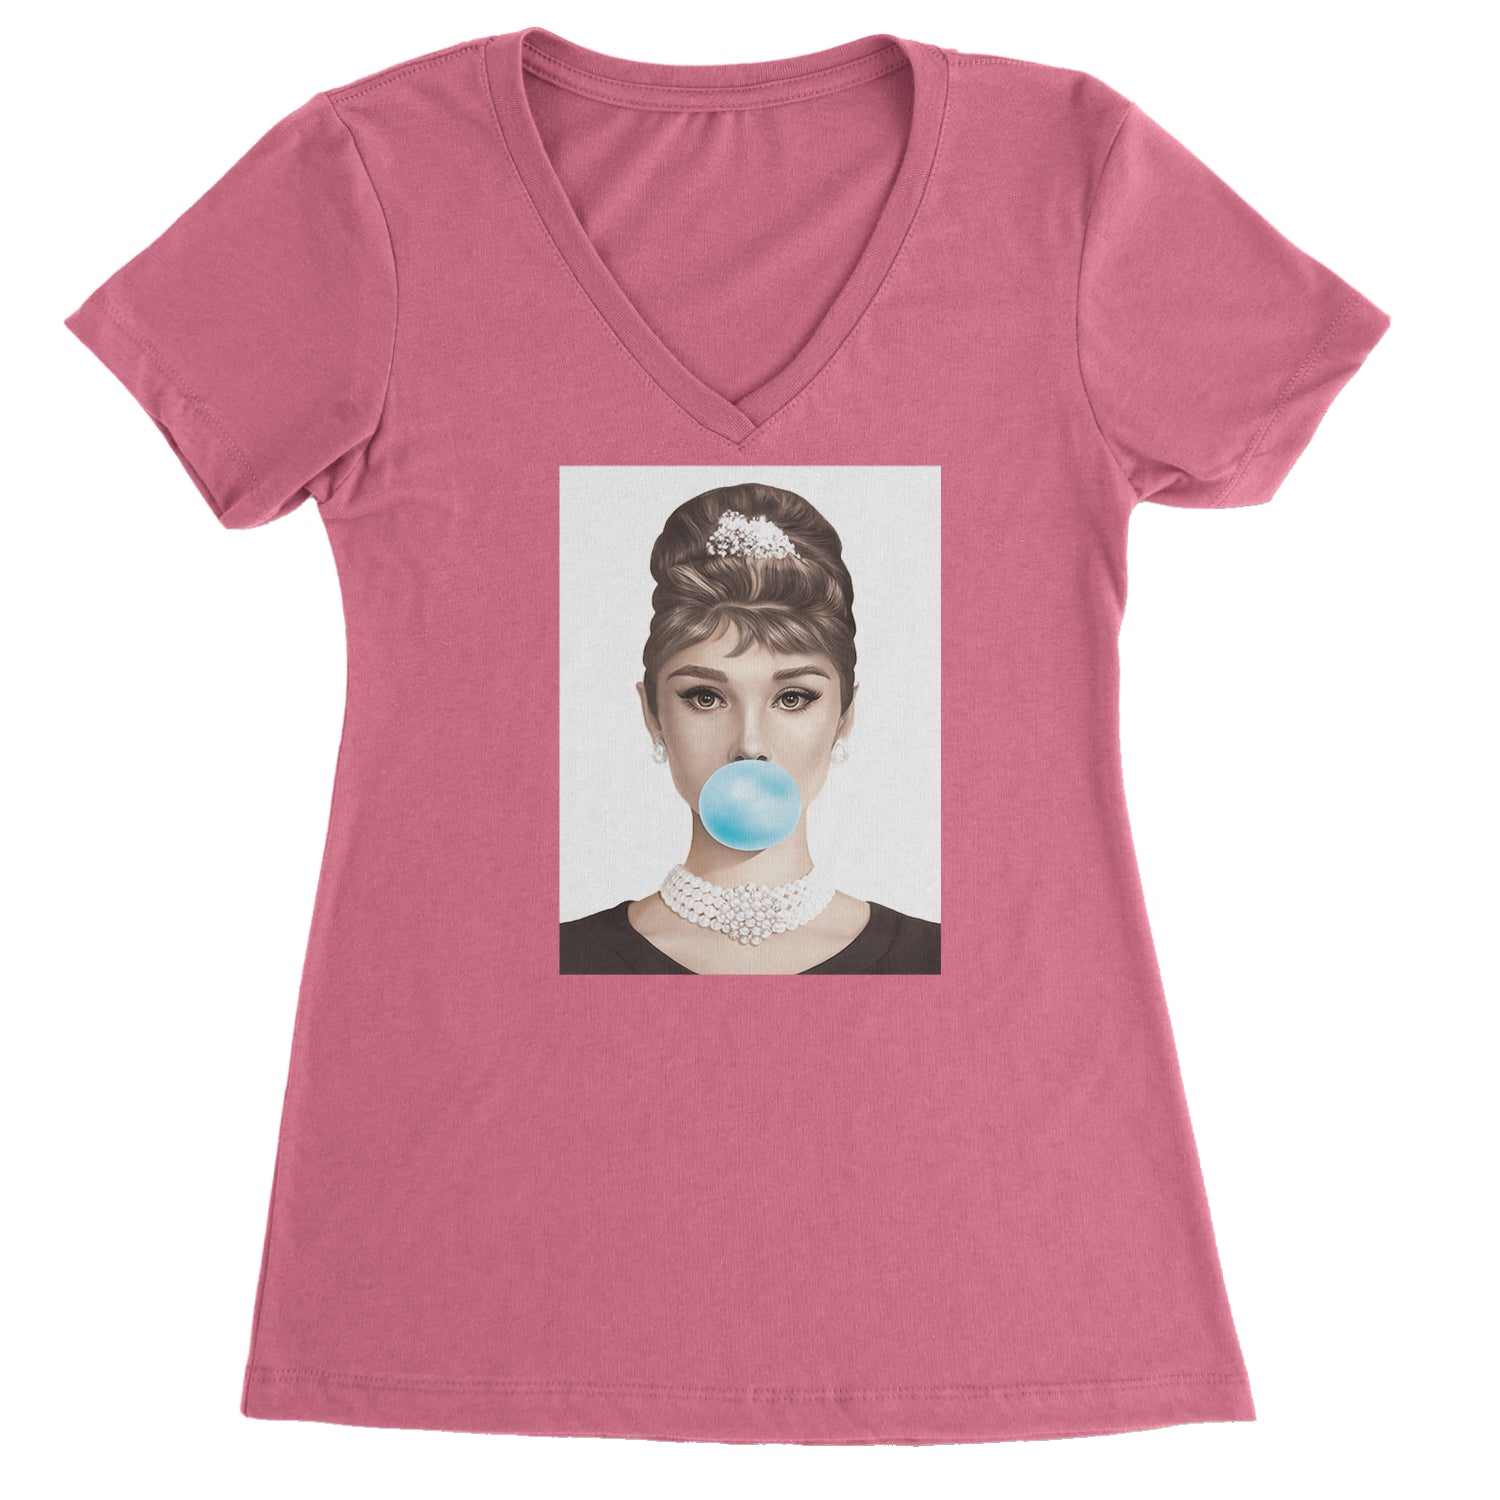 Audrey Hepburn Chewing Bubble Gum American Icon Ladies V-Neck T-shirt Hot Pink